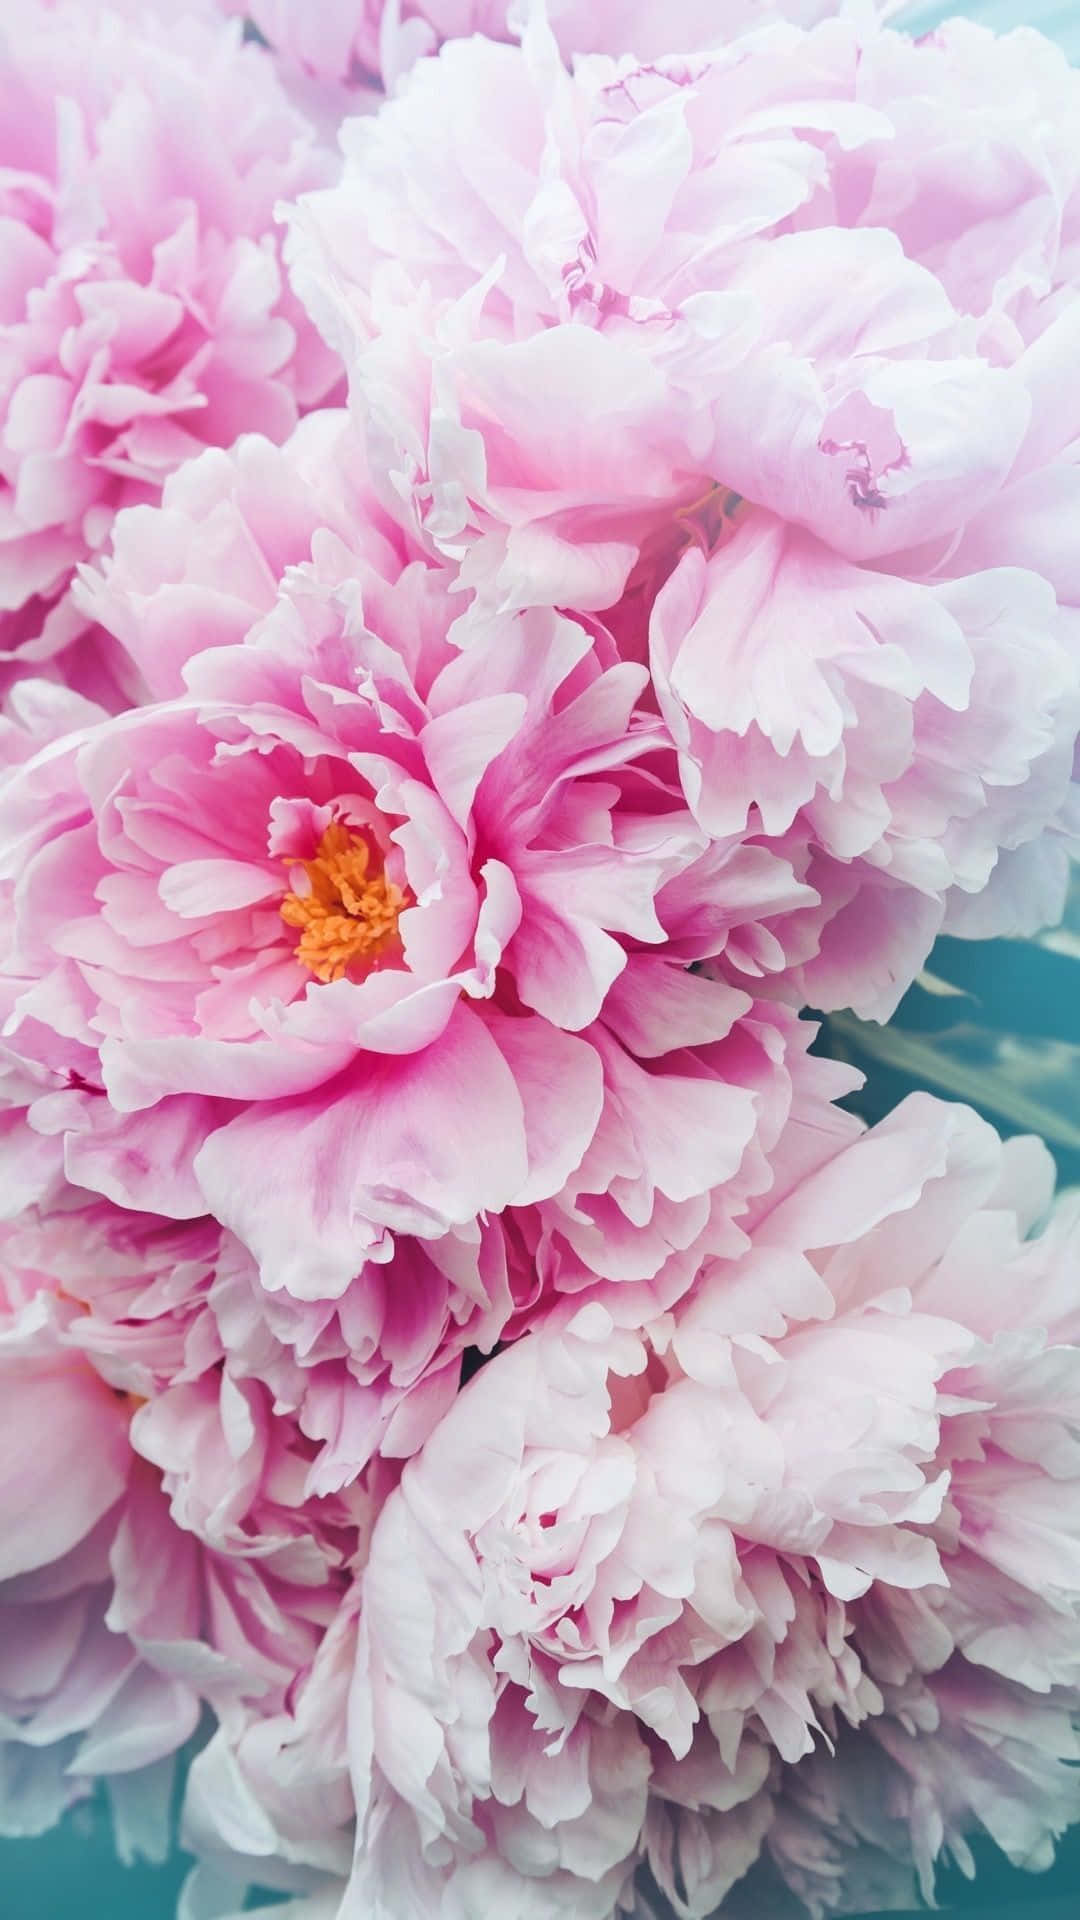 A beautiful Peony flower in bloom on an Iphone Wallpaper